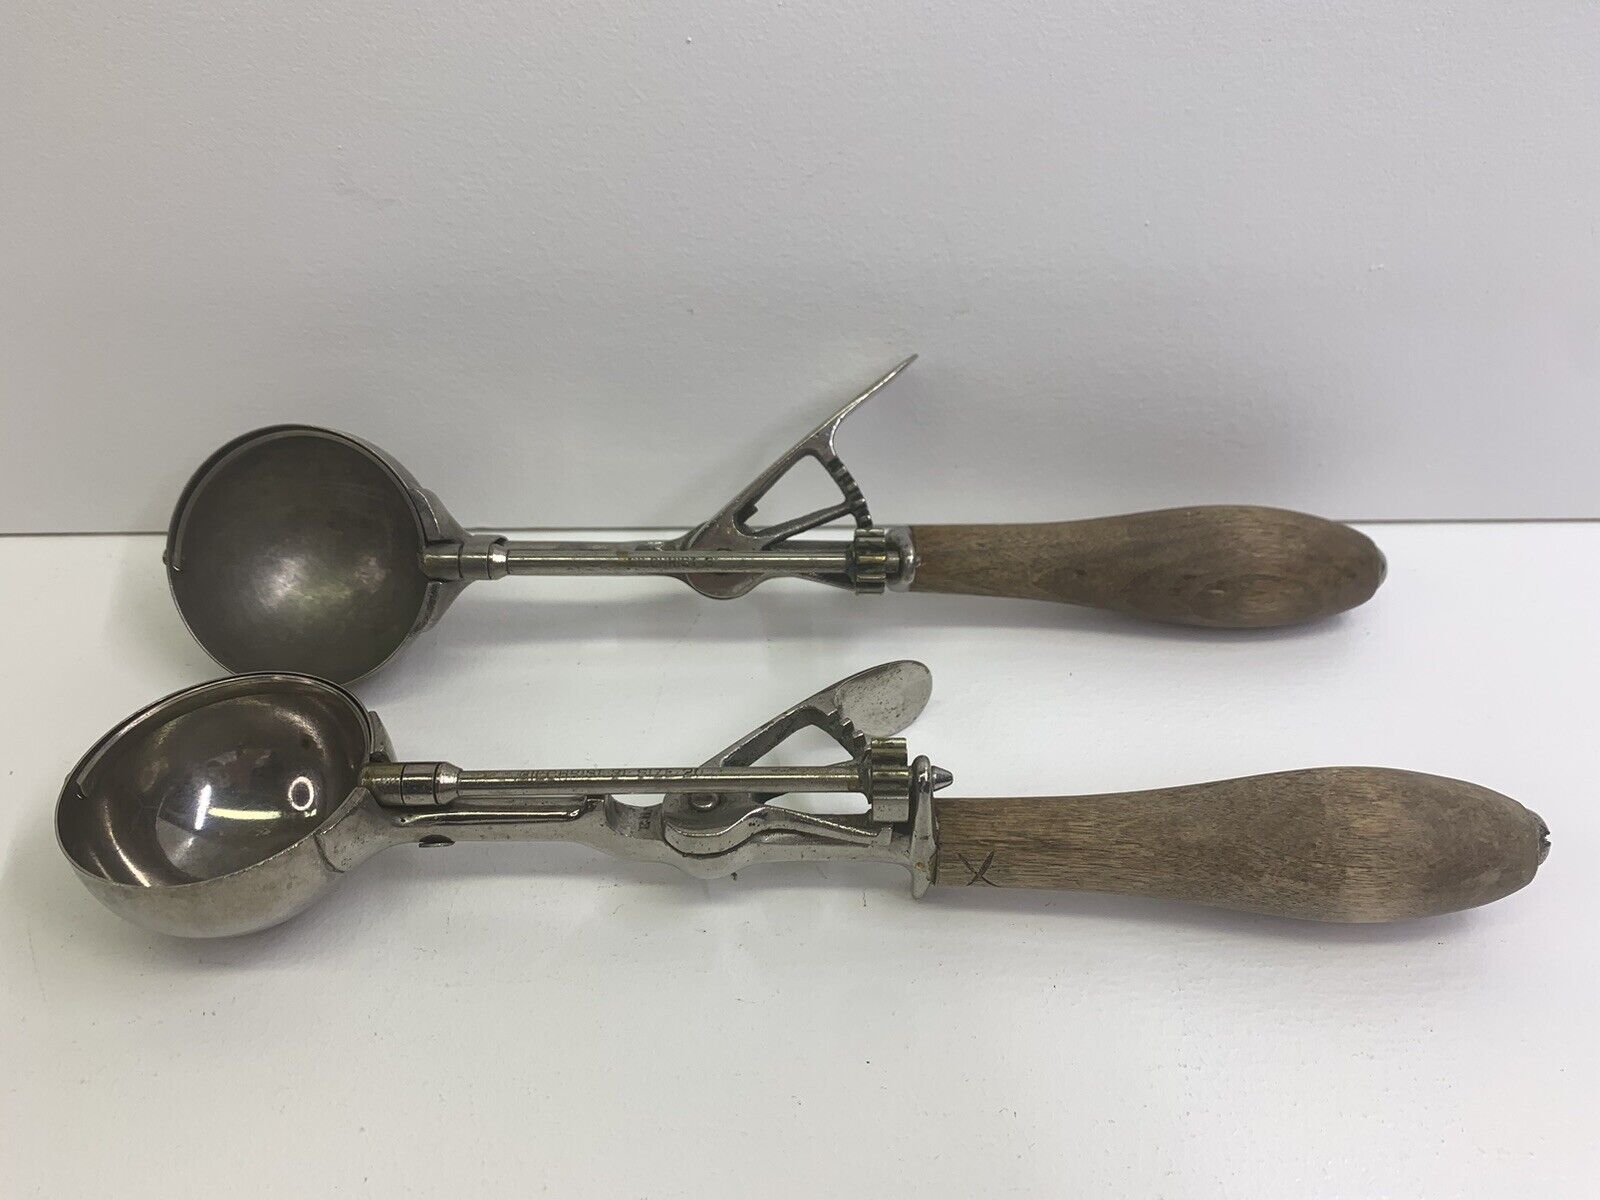 Vintage Set of 2 Gilchrist No. 31 Ice Cream Scoop\'s with Wooden Handle Antique